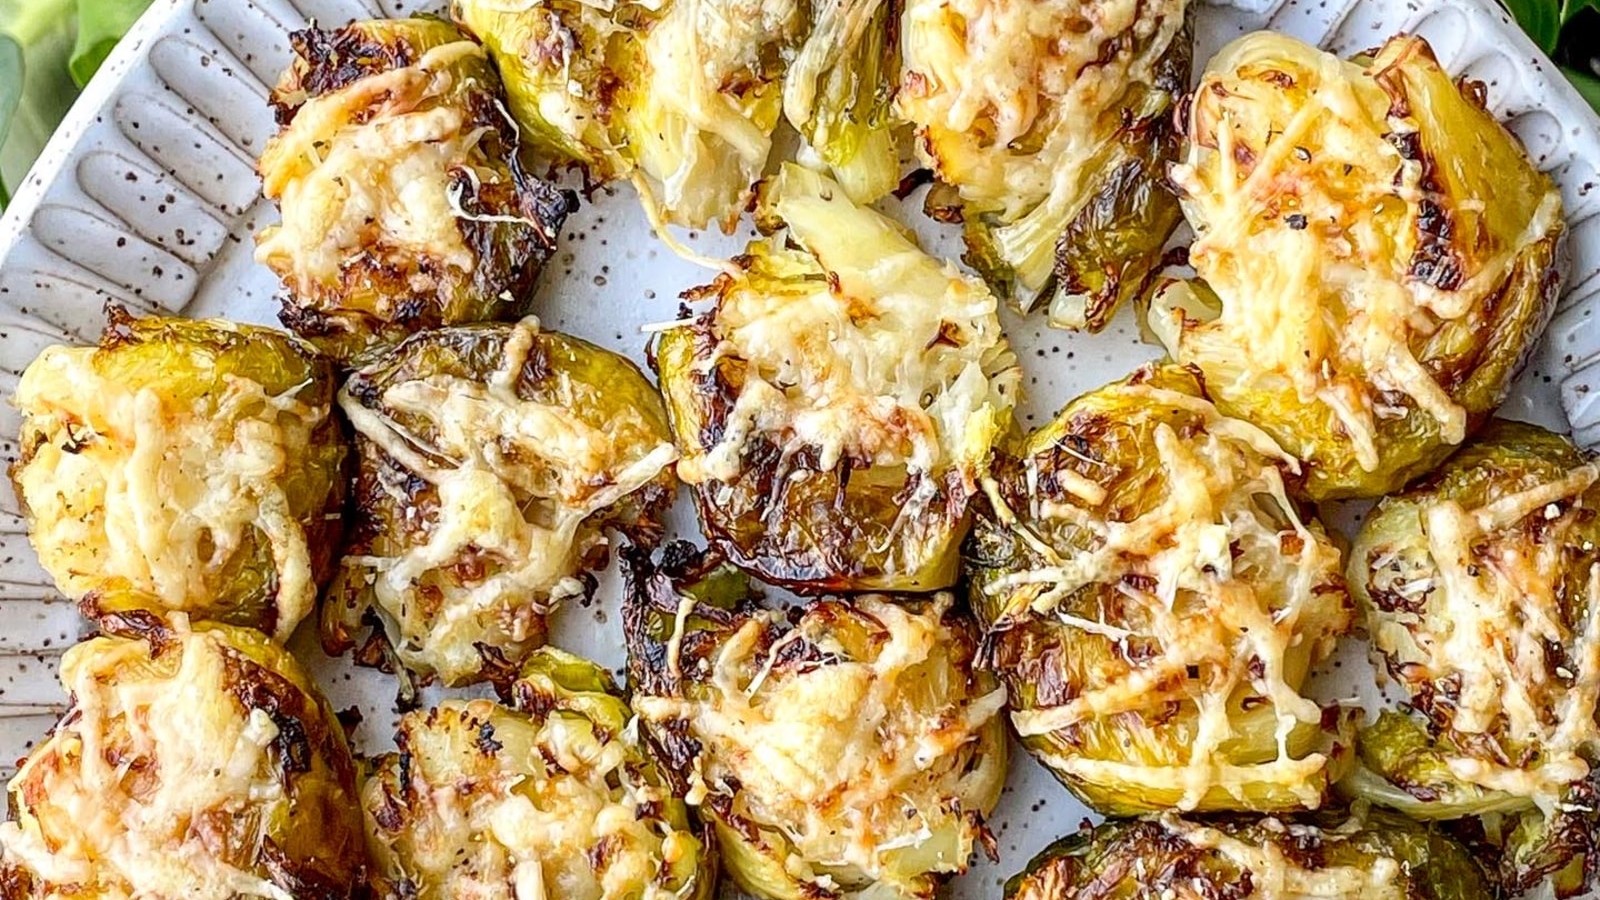 Image of Parmesan Crusted Smashed Brussels Sprouts